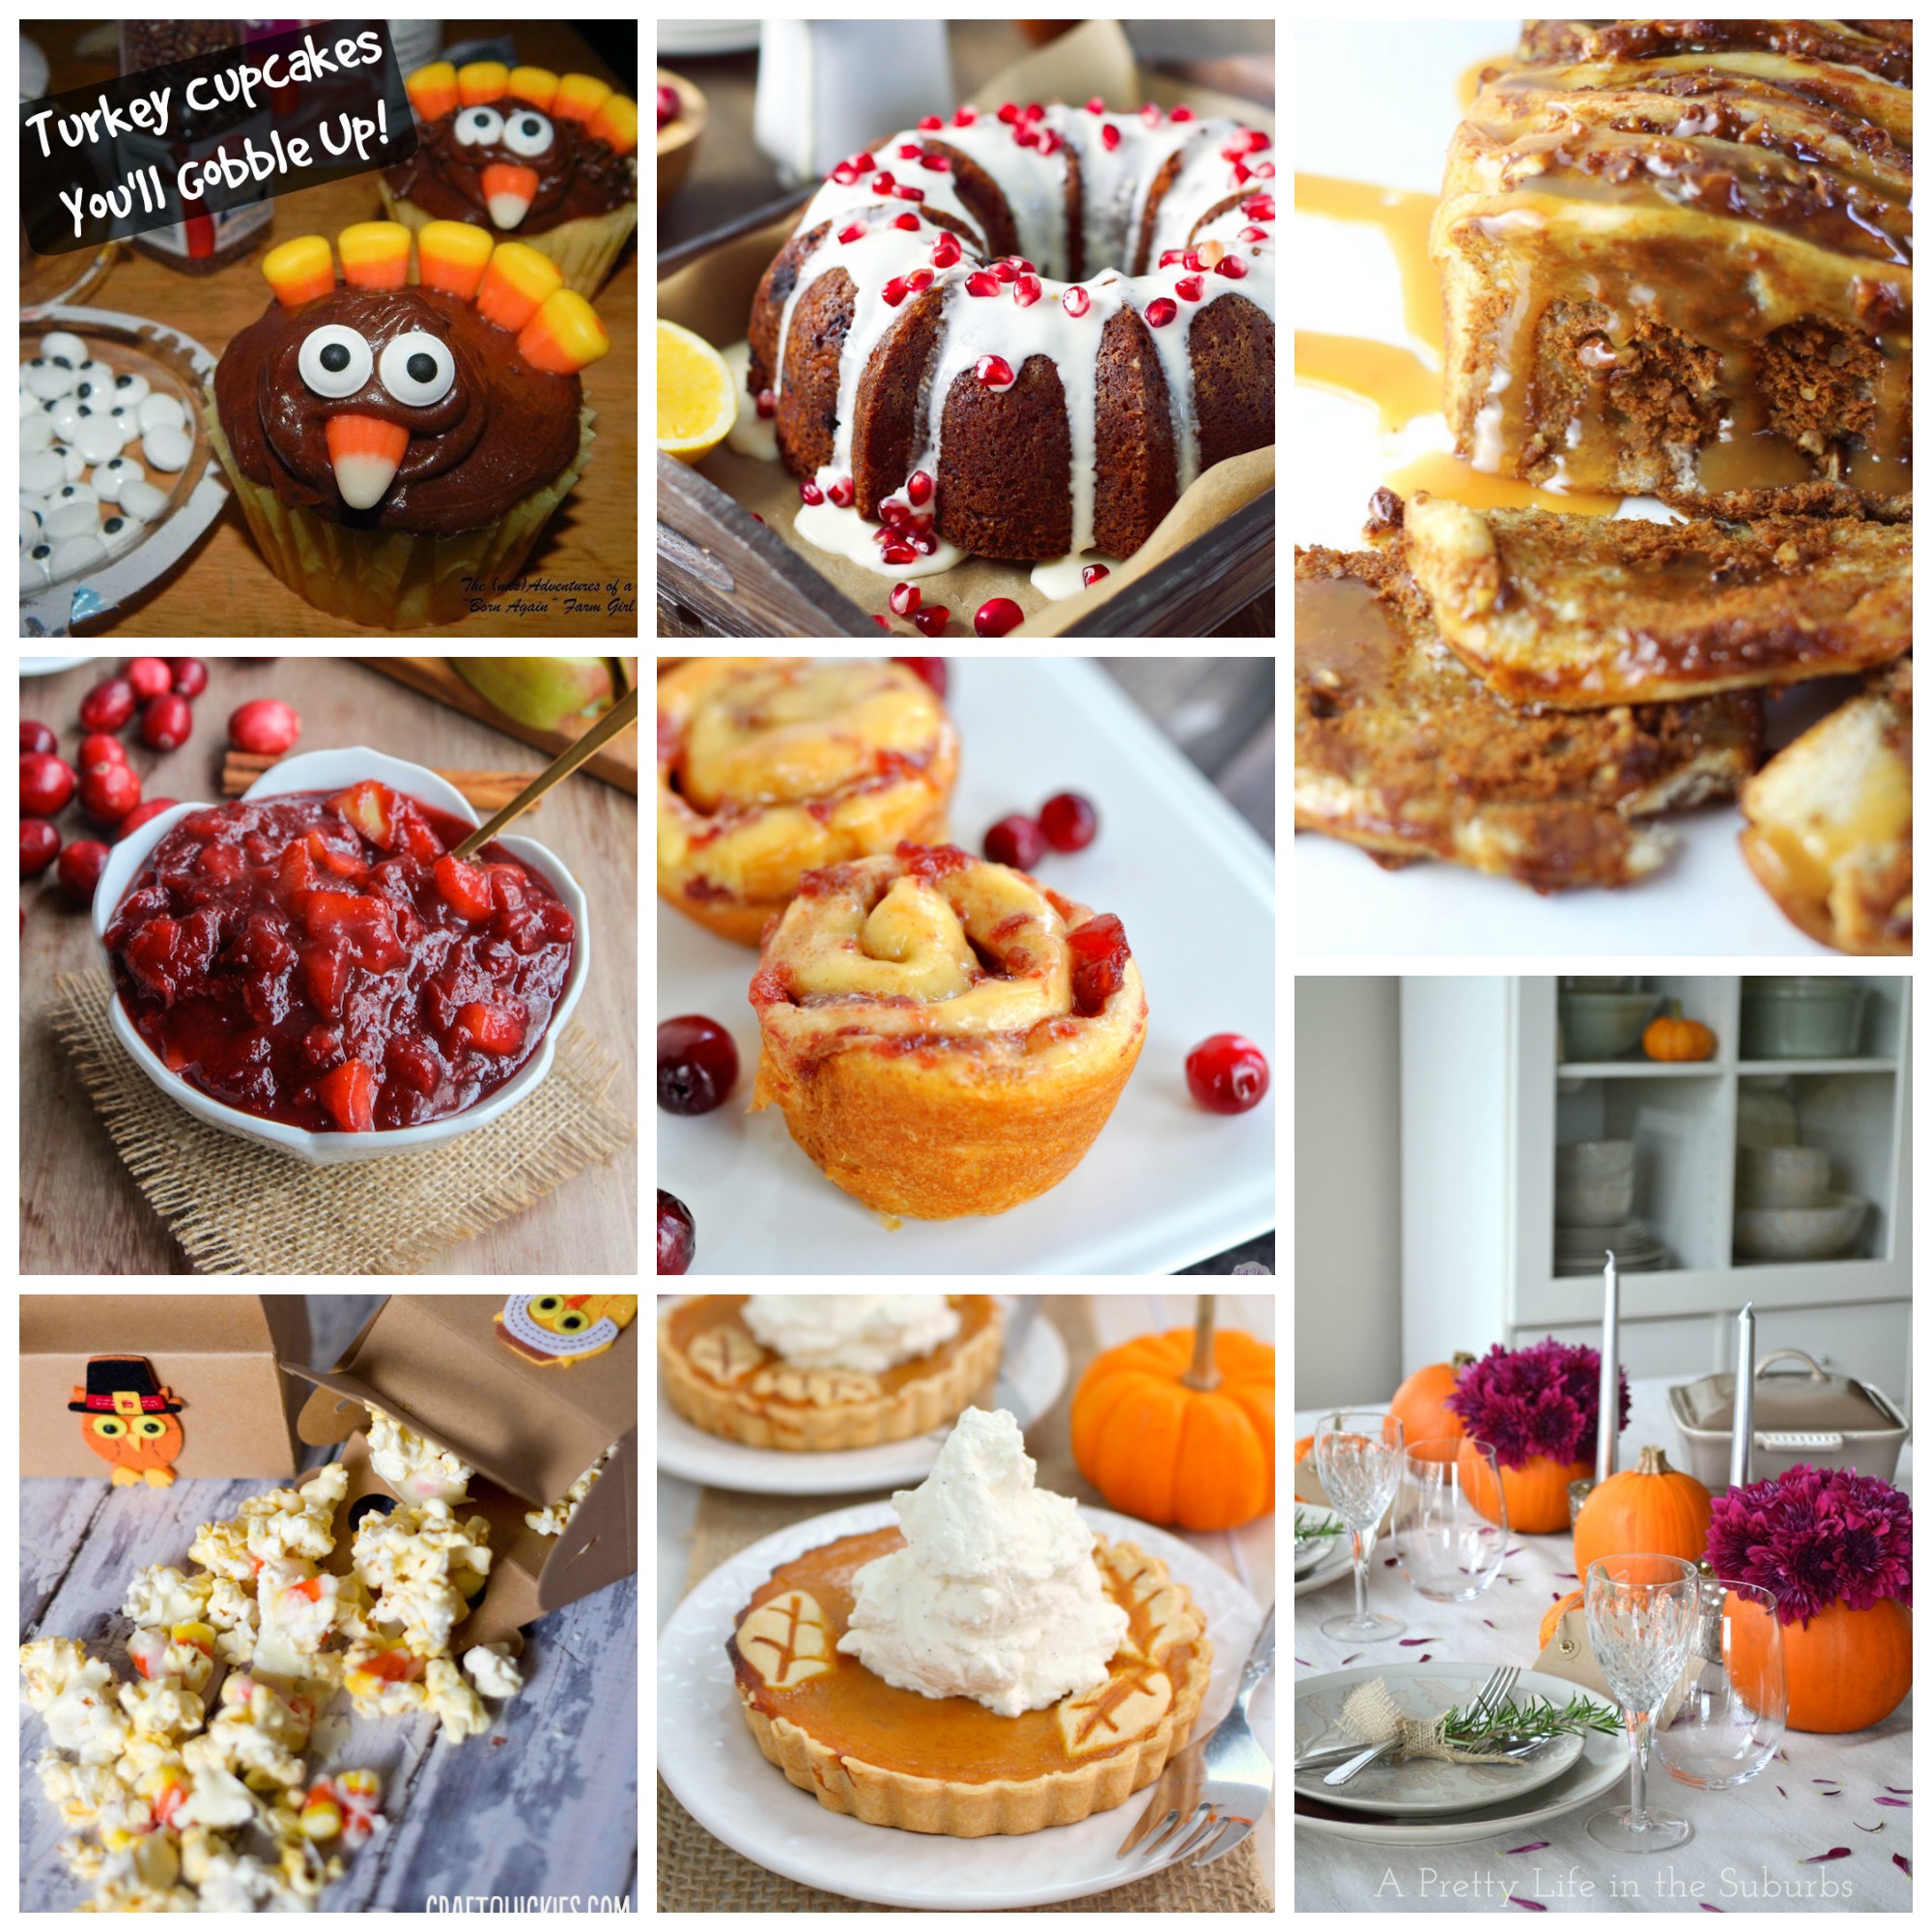 #FoodieFriDIY #72 - #Thanksgiving's Around the Corner Are y'all ready for it? If not, here's some inspiration to set your table with!